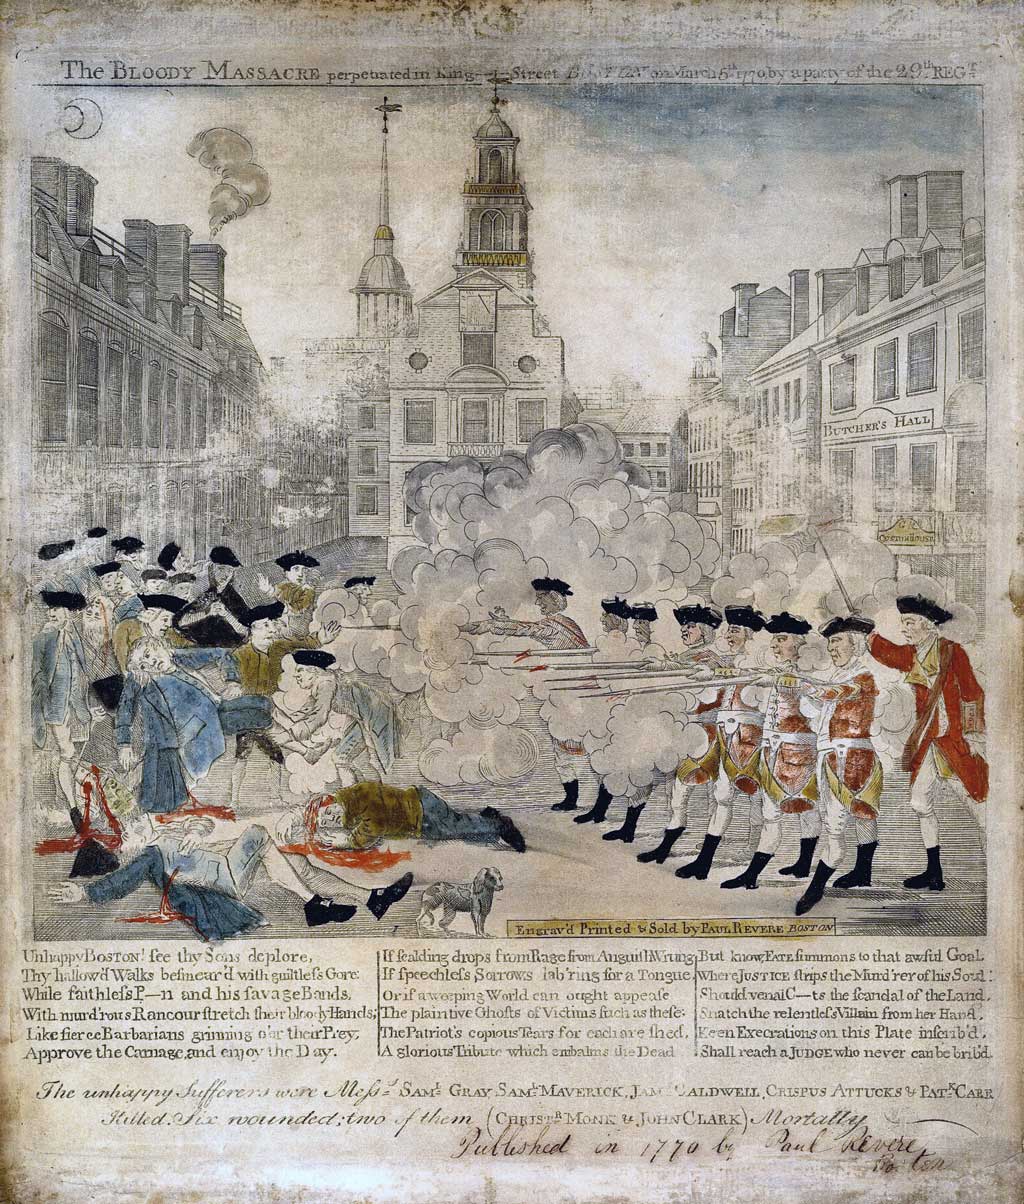 Engraved print showing a sensationalized portrayal of the skirmish, later to become known as the 'Boston Massacre,' between British soldiers and citizens of Boston on March 5, 1770. On the right a group of seven uniformed soldiers, on the signal of an officer, fire into a crowd of civilians at left. Three of the latter lie bleeding on the ground. Two other casualties have been lifted by the crowd. In the foreground is a dog; in the background are a row of houses, the First Church, and the Town House. Behind the British troops is another row of buildings including the Royal Custom House, which bears the sign 'Butcher's Hall.'